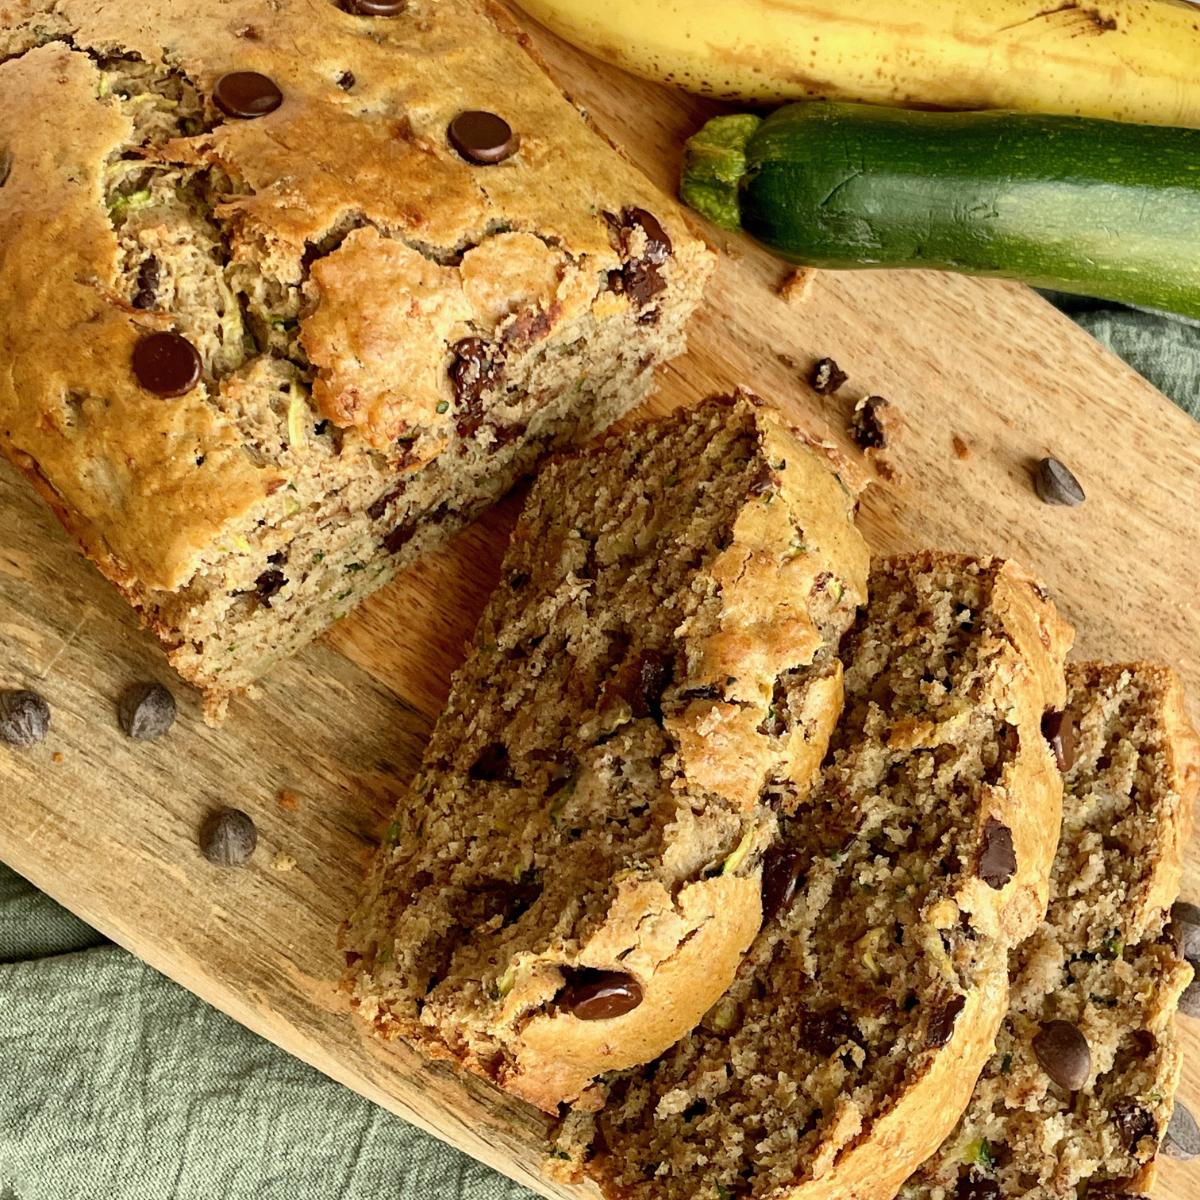 Slices of vegan zucchini banana bread with chocolate chips.